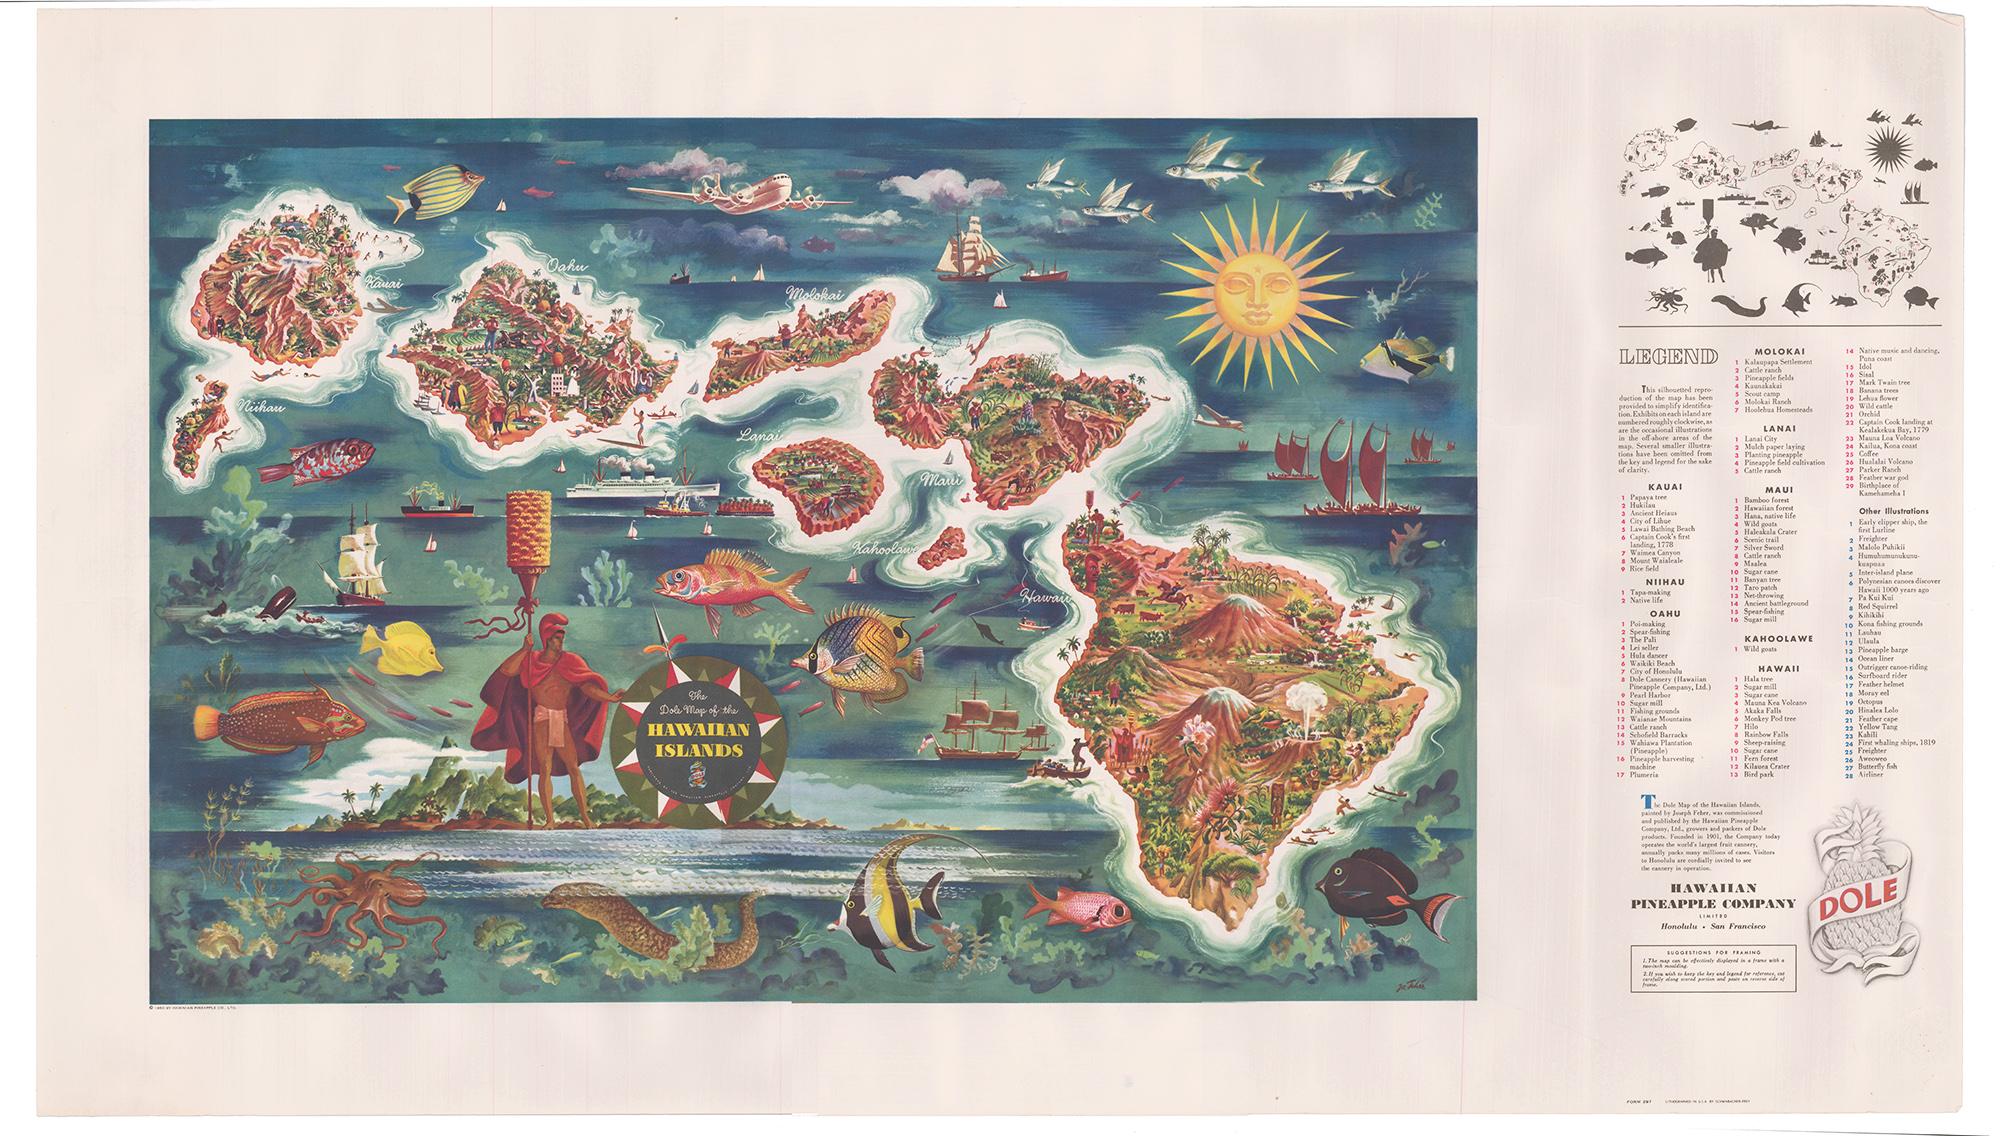 The Dole Map of the Hawaiian Islands.  - Print by Unknown